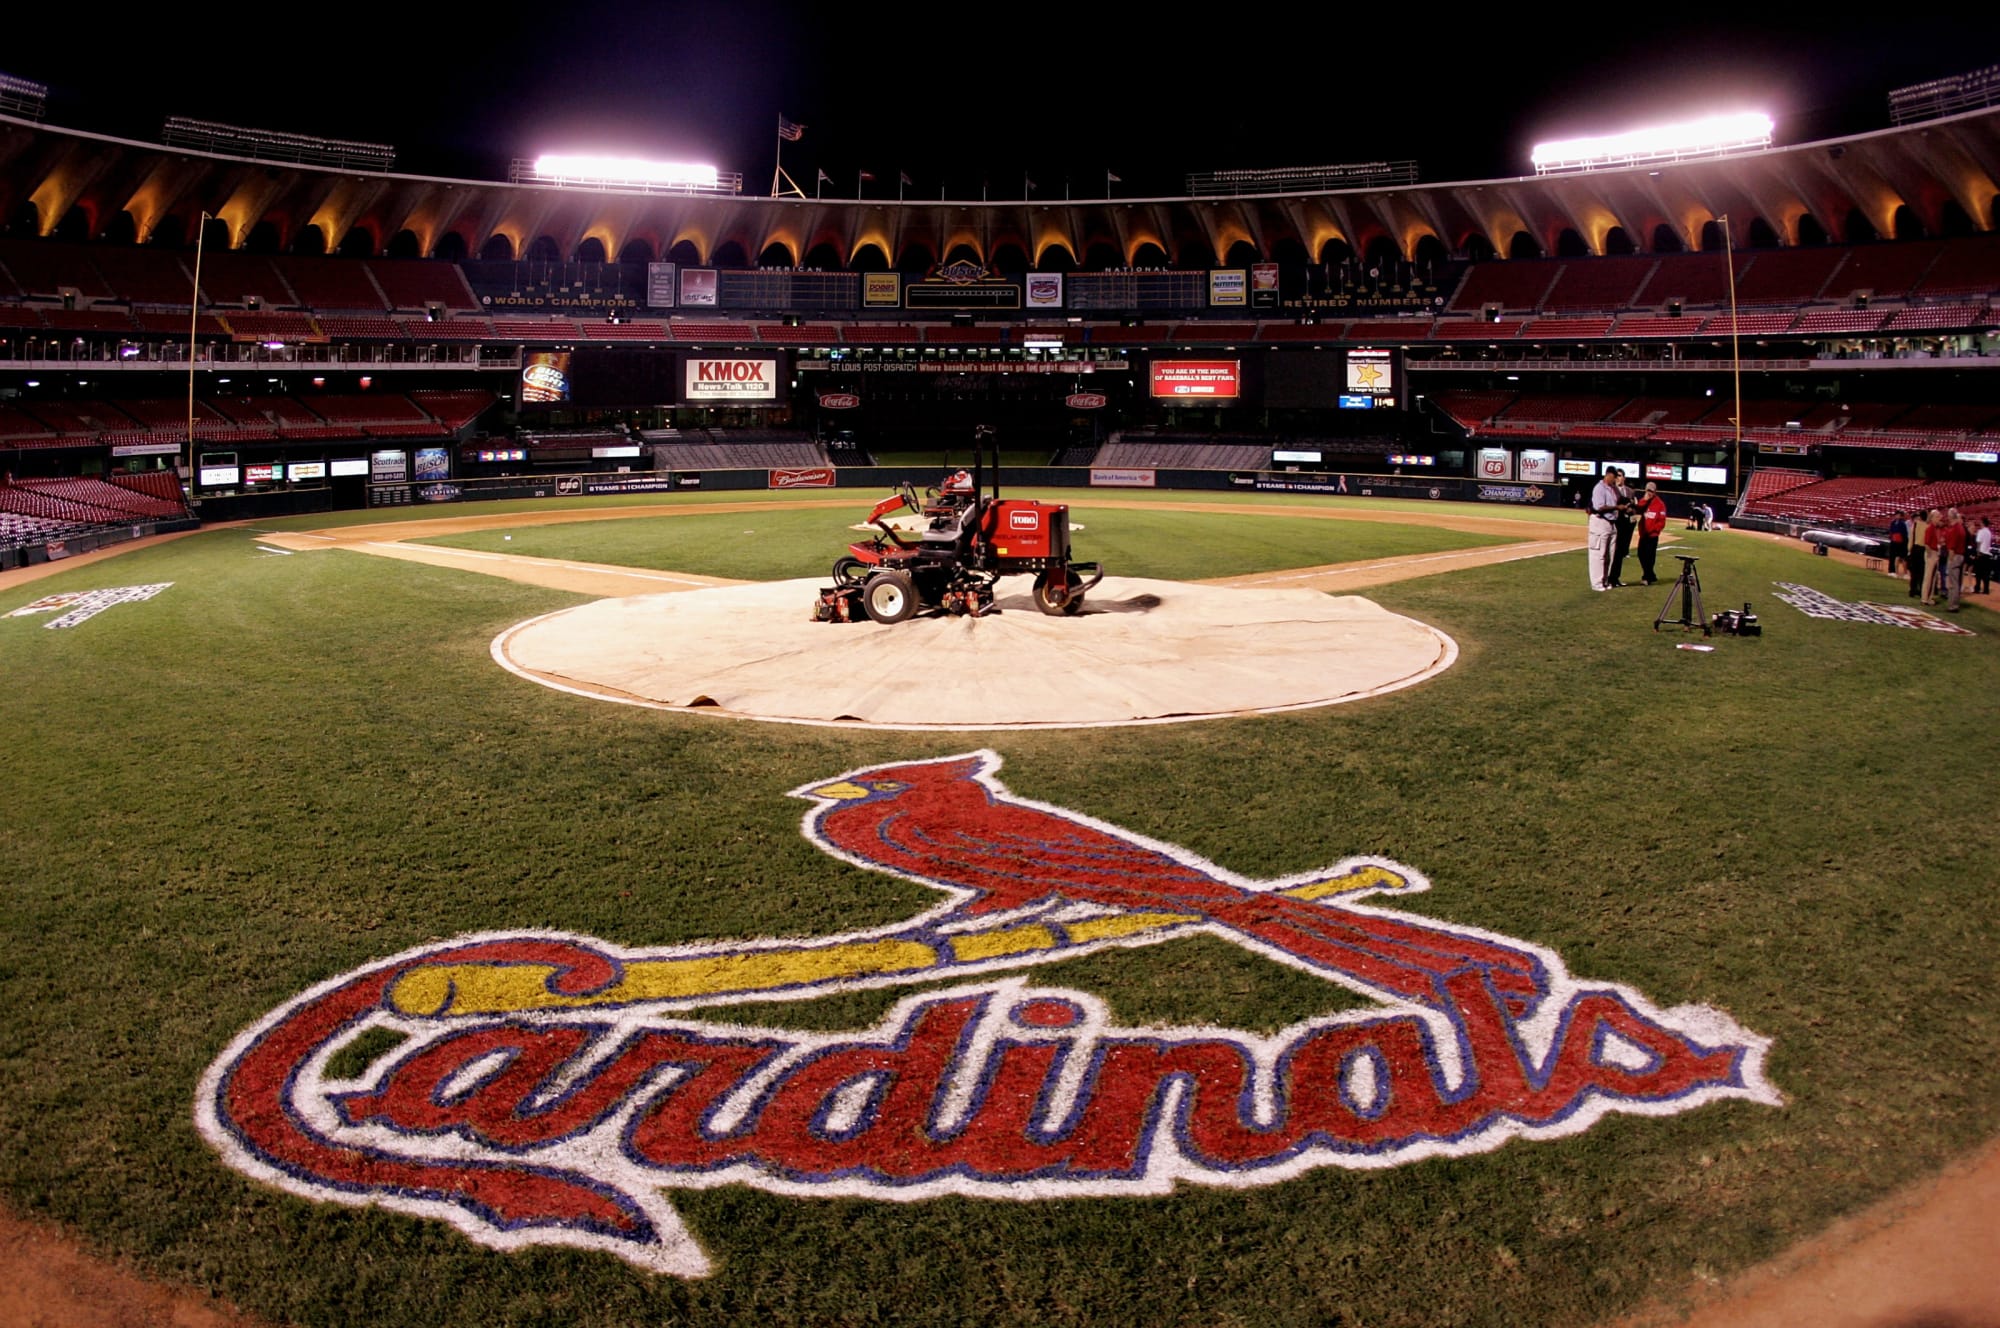 St. Louis Cardinals series with Pittsburgh Pirates postponed